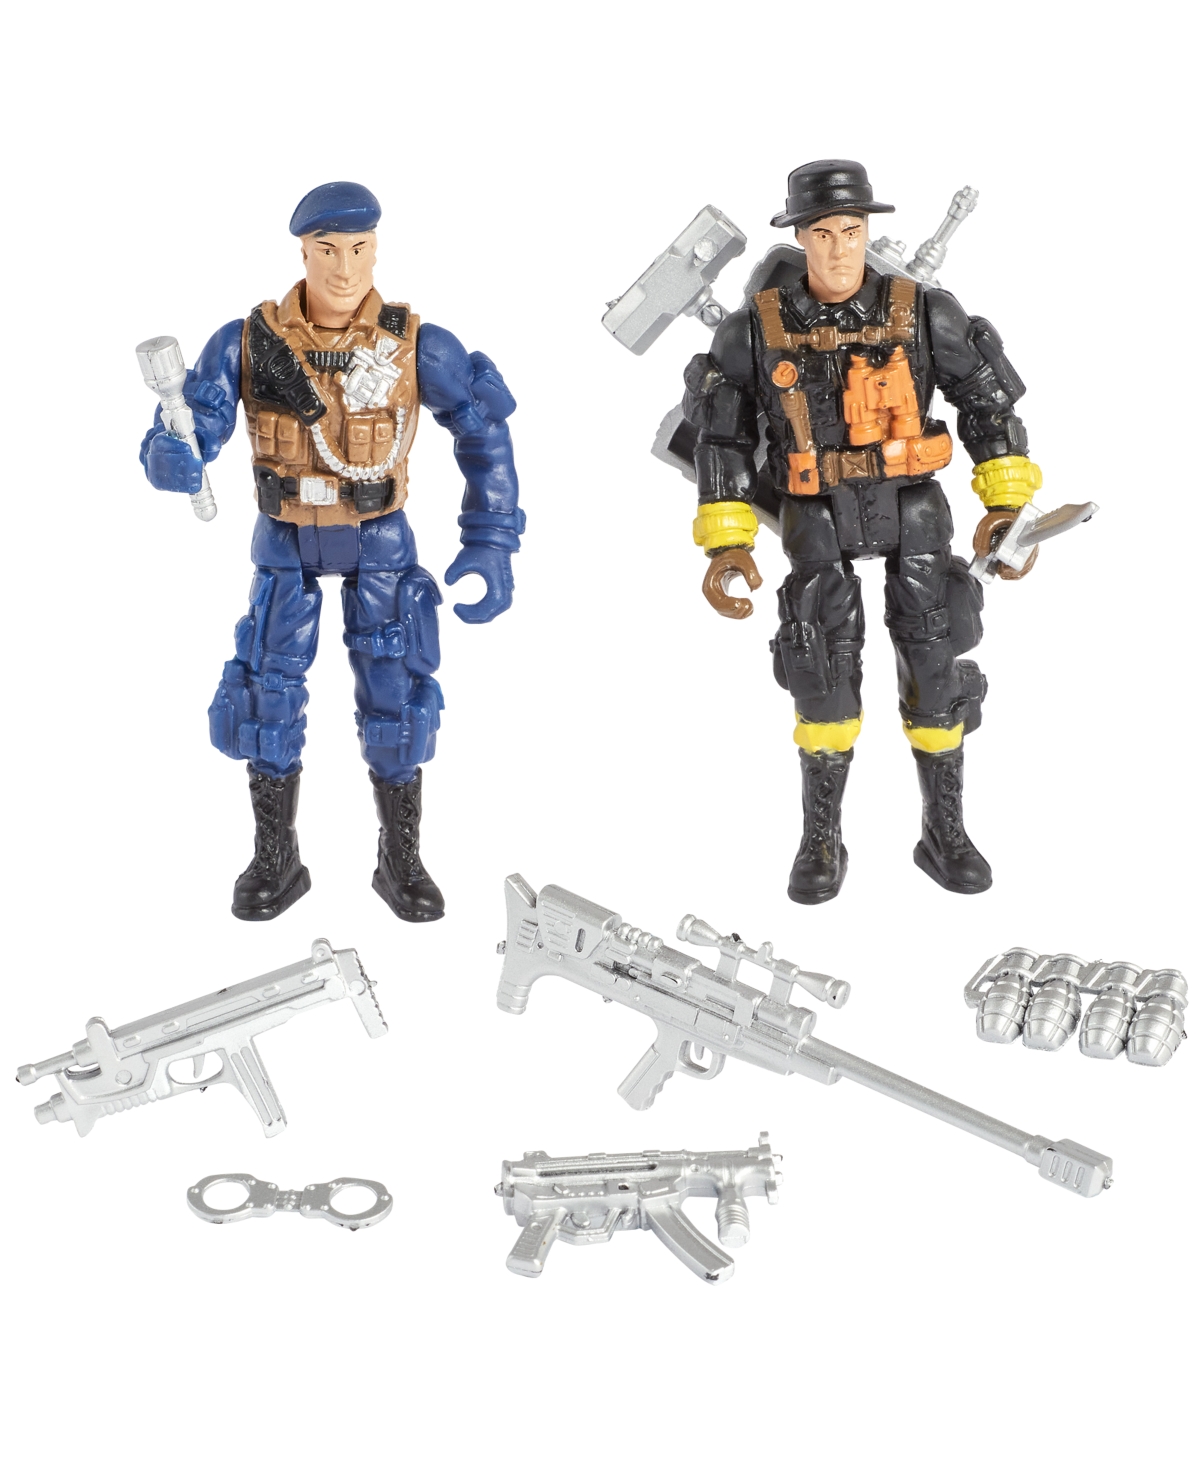 True Heroes Special Weapons And Tactics - Police Playset, Created for You by Toys R Us